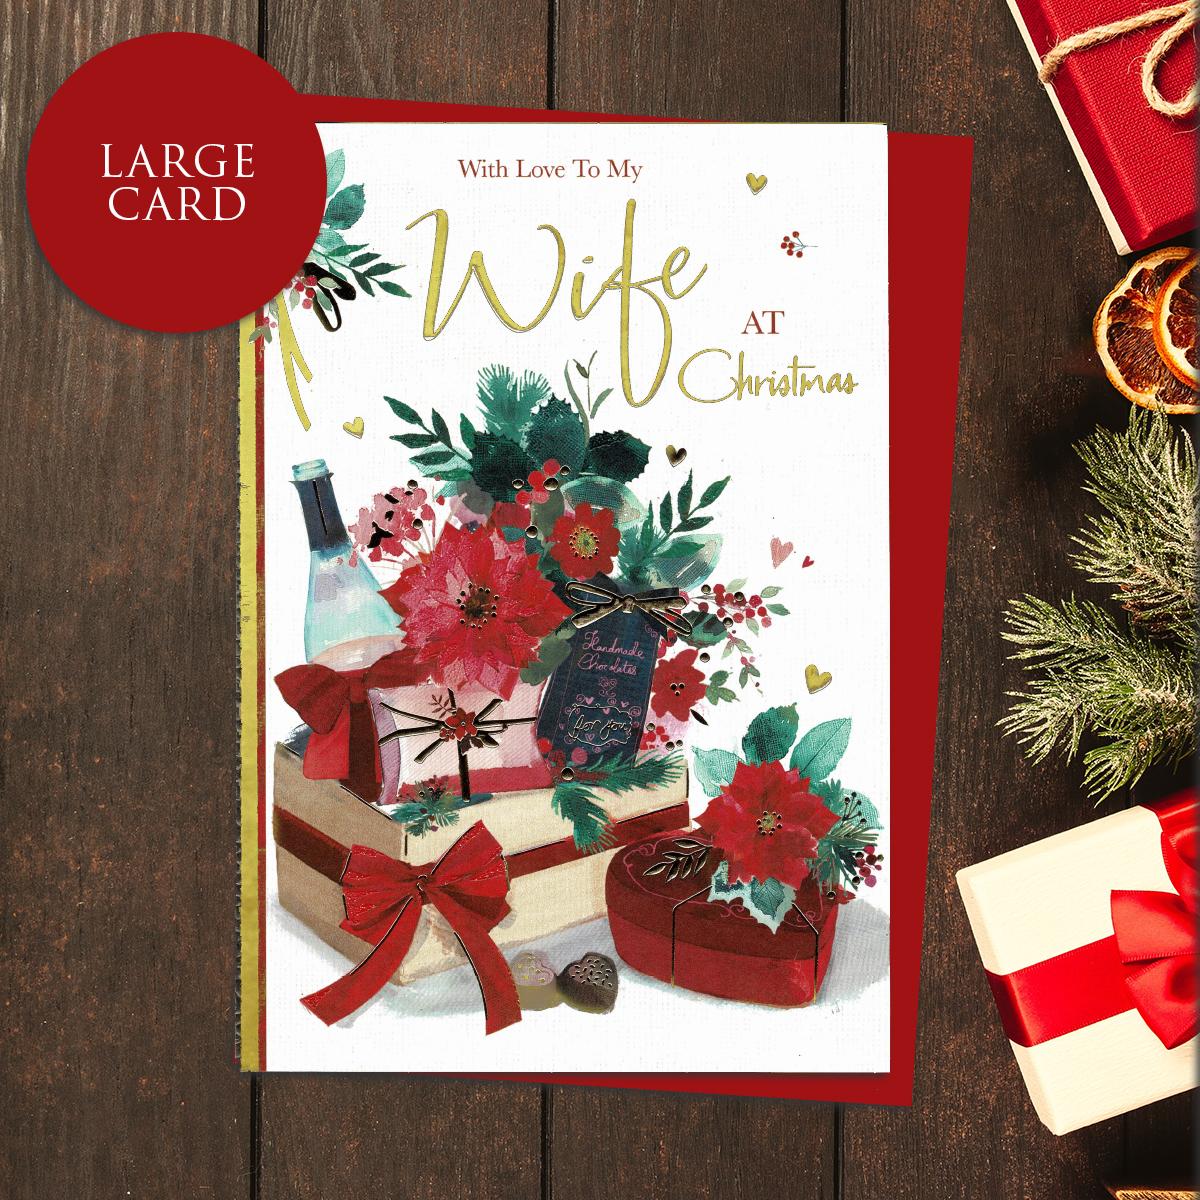 With Love To My Wife At Christmas Card showing A Festive Box Of Gifts And Poinsettias. Accents And Lettering In Gold Foil And Completed With A Co-Ordinating Red Envelope